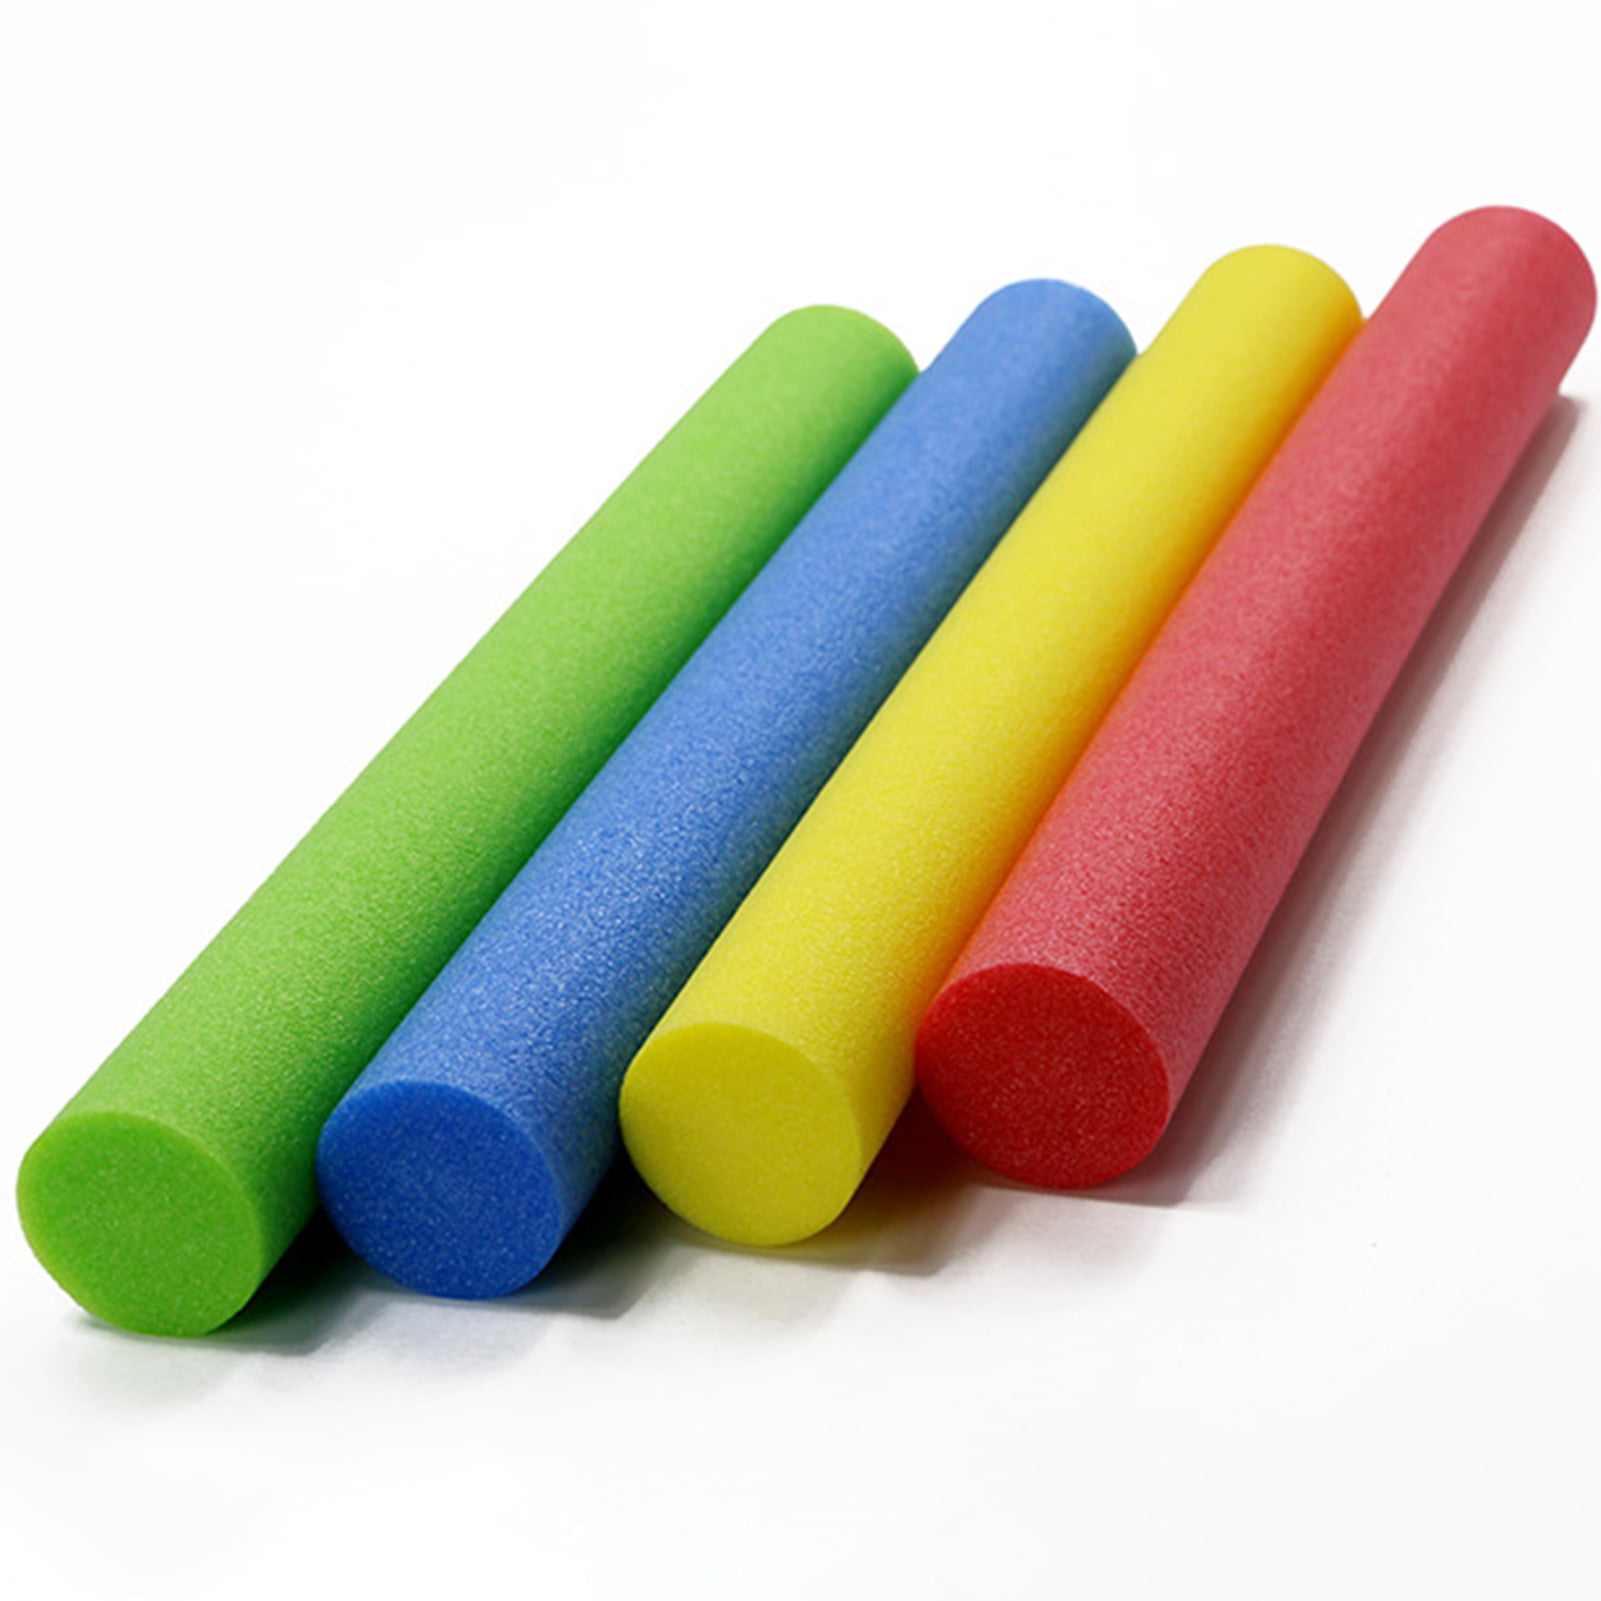 Floating and Craft Projects Foam Noodles for Swimming Soft Foam Swimming Floating Toy Equipment Foam Pool Swim Noodle Floating Pool Noodles Foam Tube 59 Inches Long Aeihevo Swimming Pool Noodle 